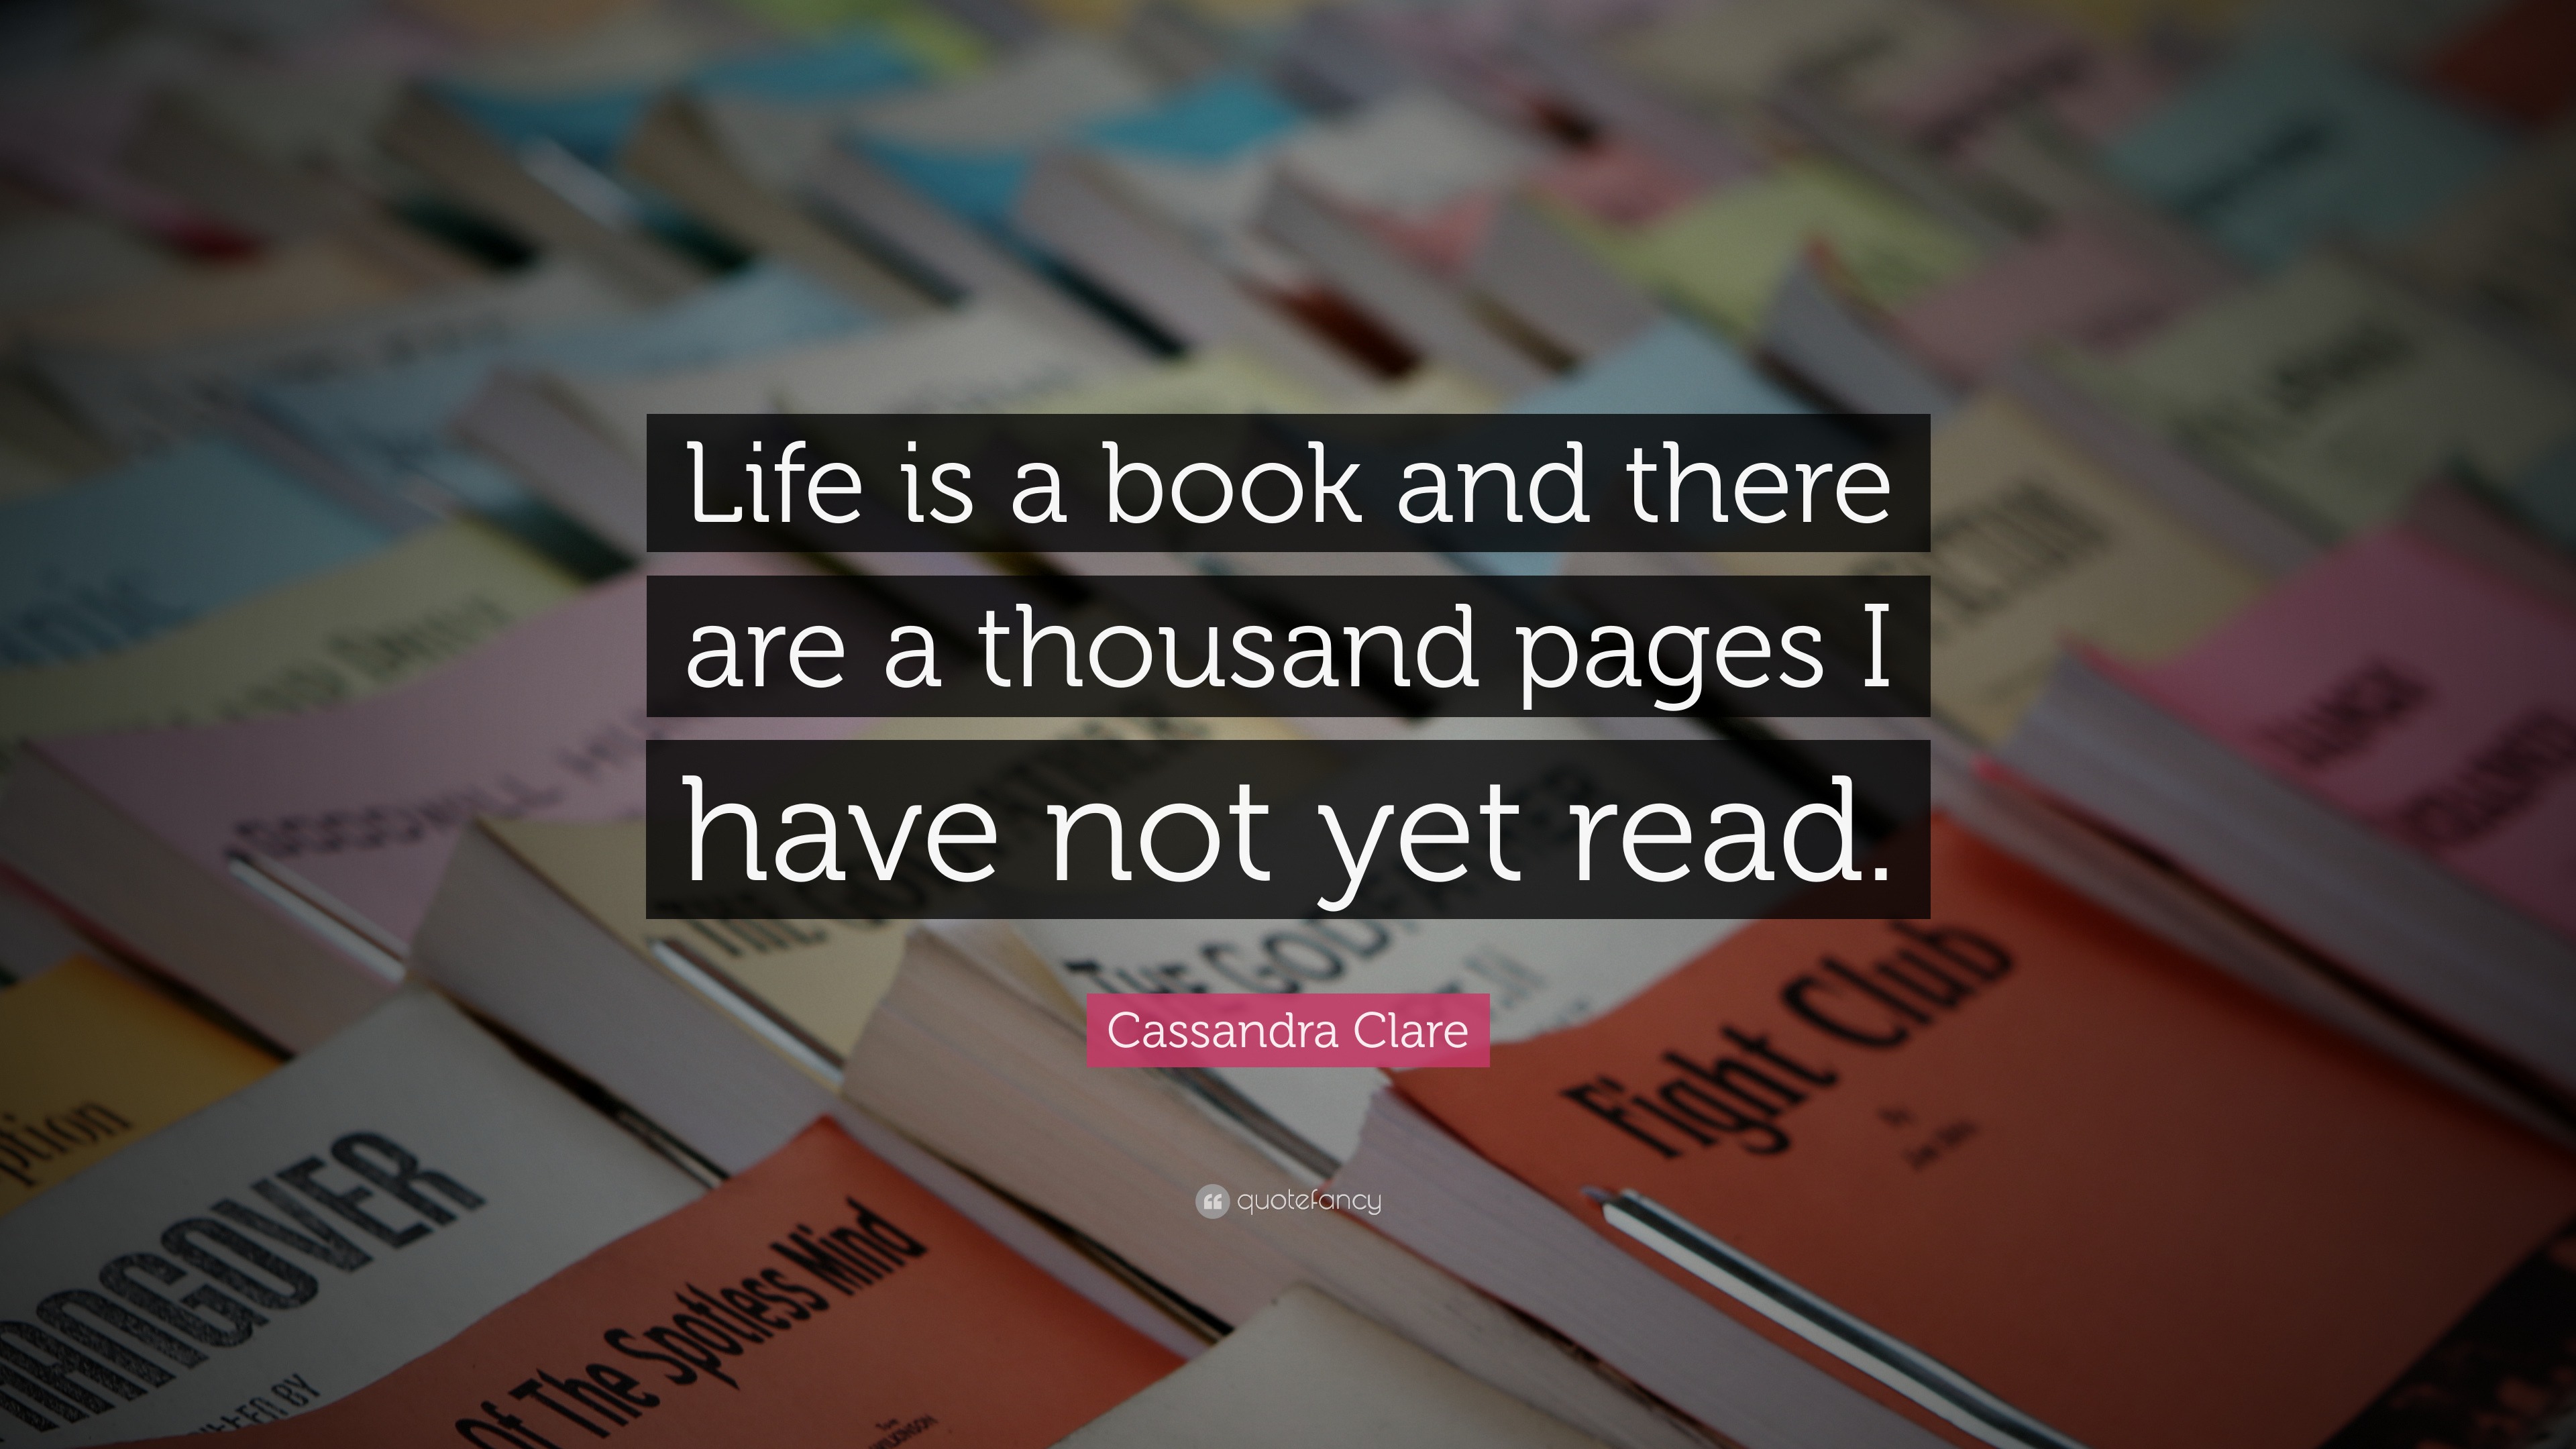 Cassandra Clare Quote: “Life is a book and there are a thousand pages I